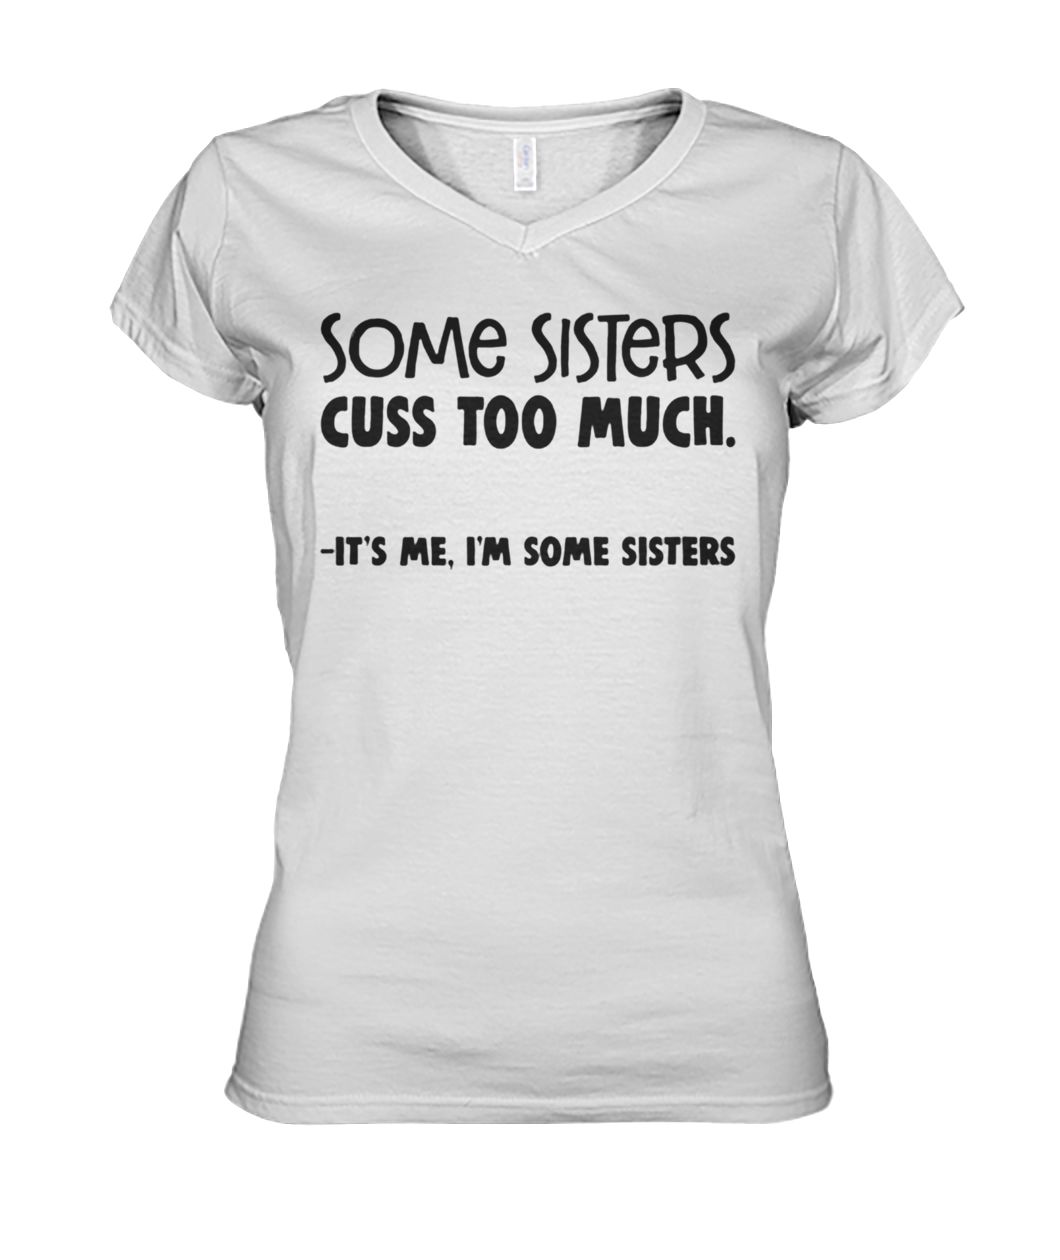 Some sisters cuss too much it's me I'm some sisters women's v-neck